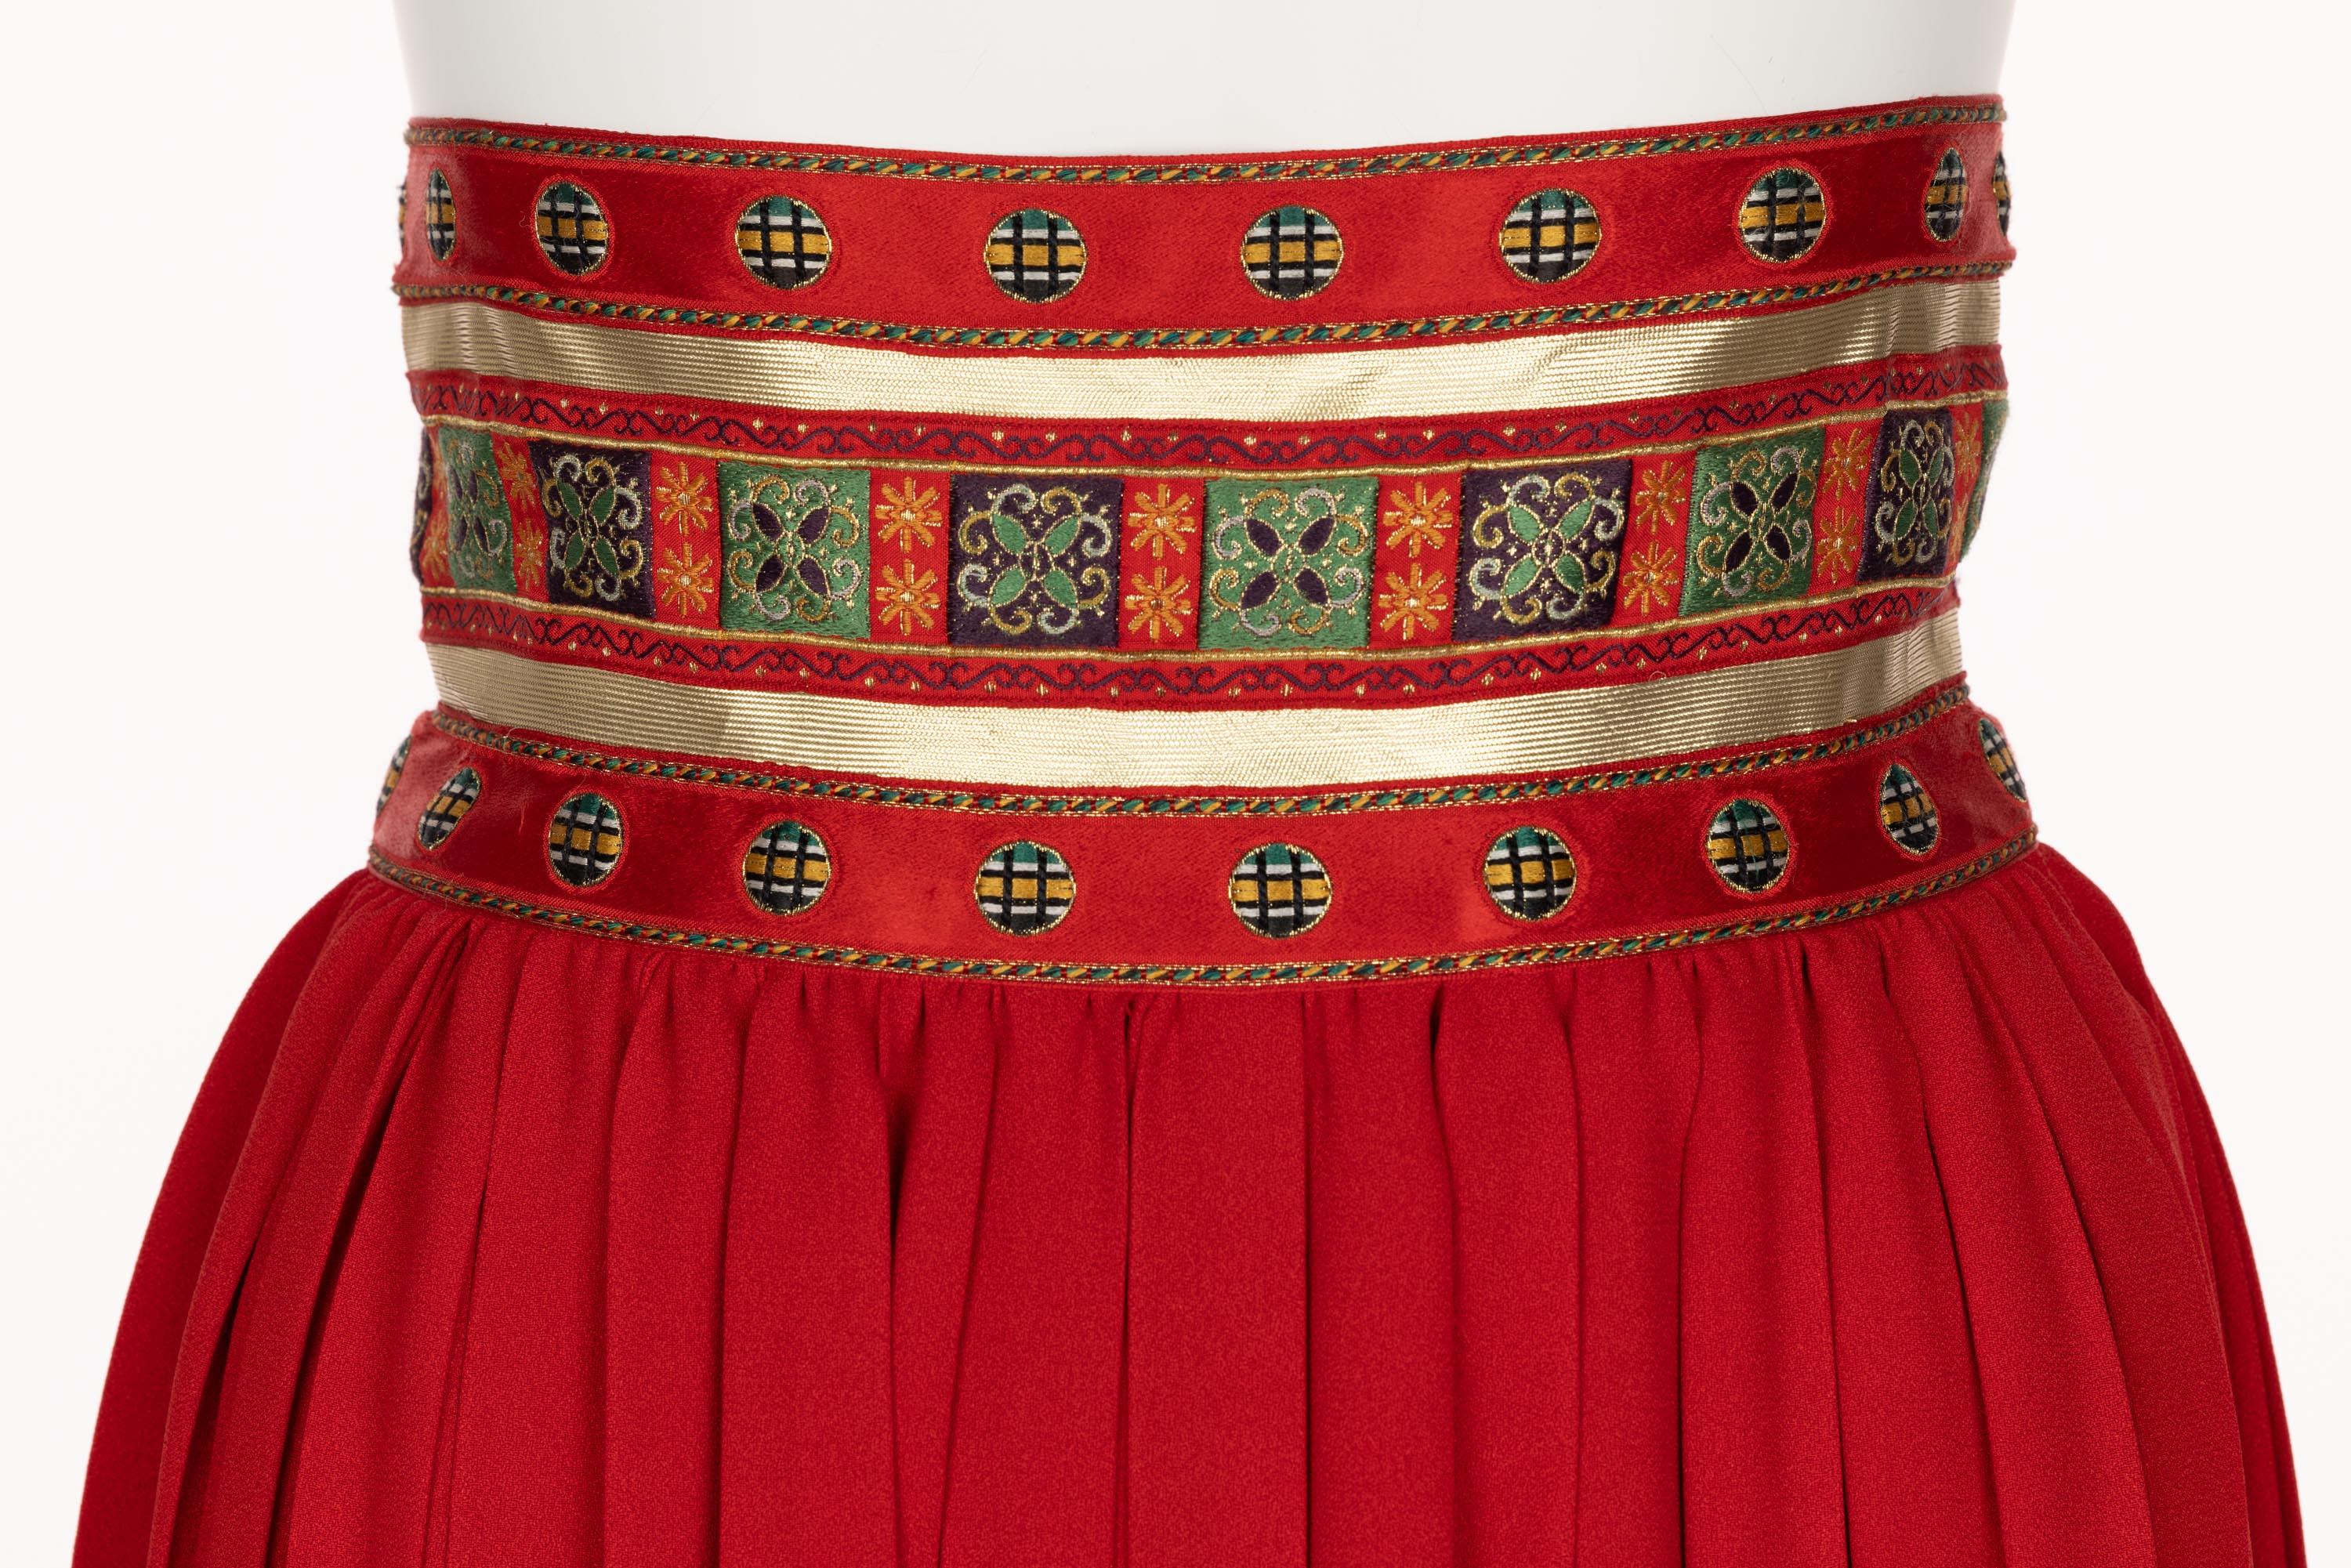 Lanvin Jules-François Crahay Demi Couture Red Pleated Brocade Maxi Skirt 1970s For Sale 1